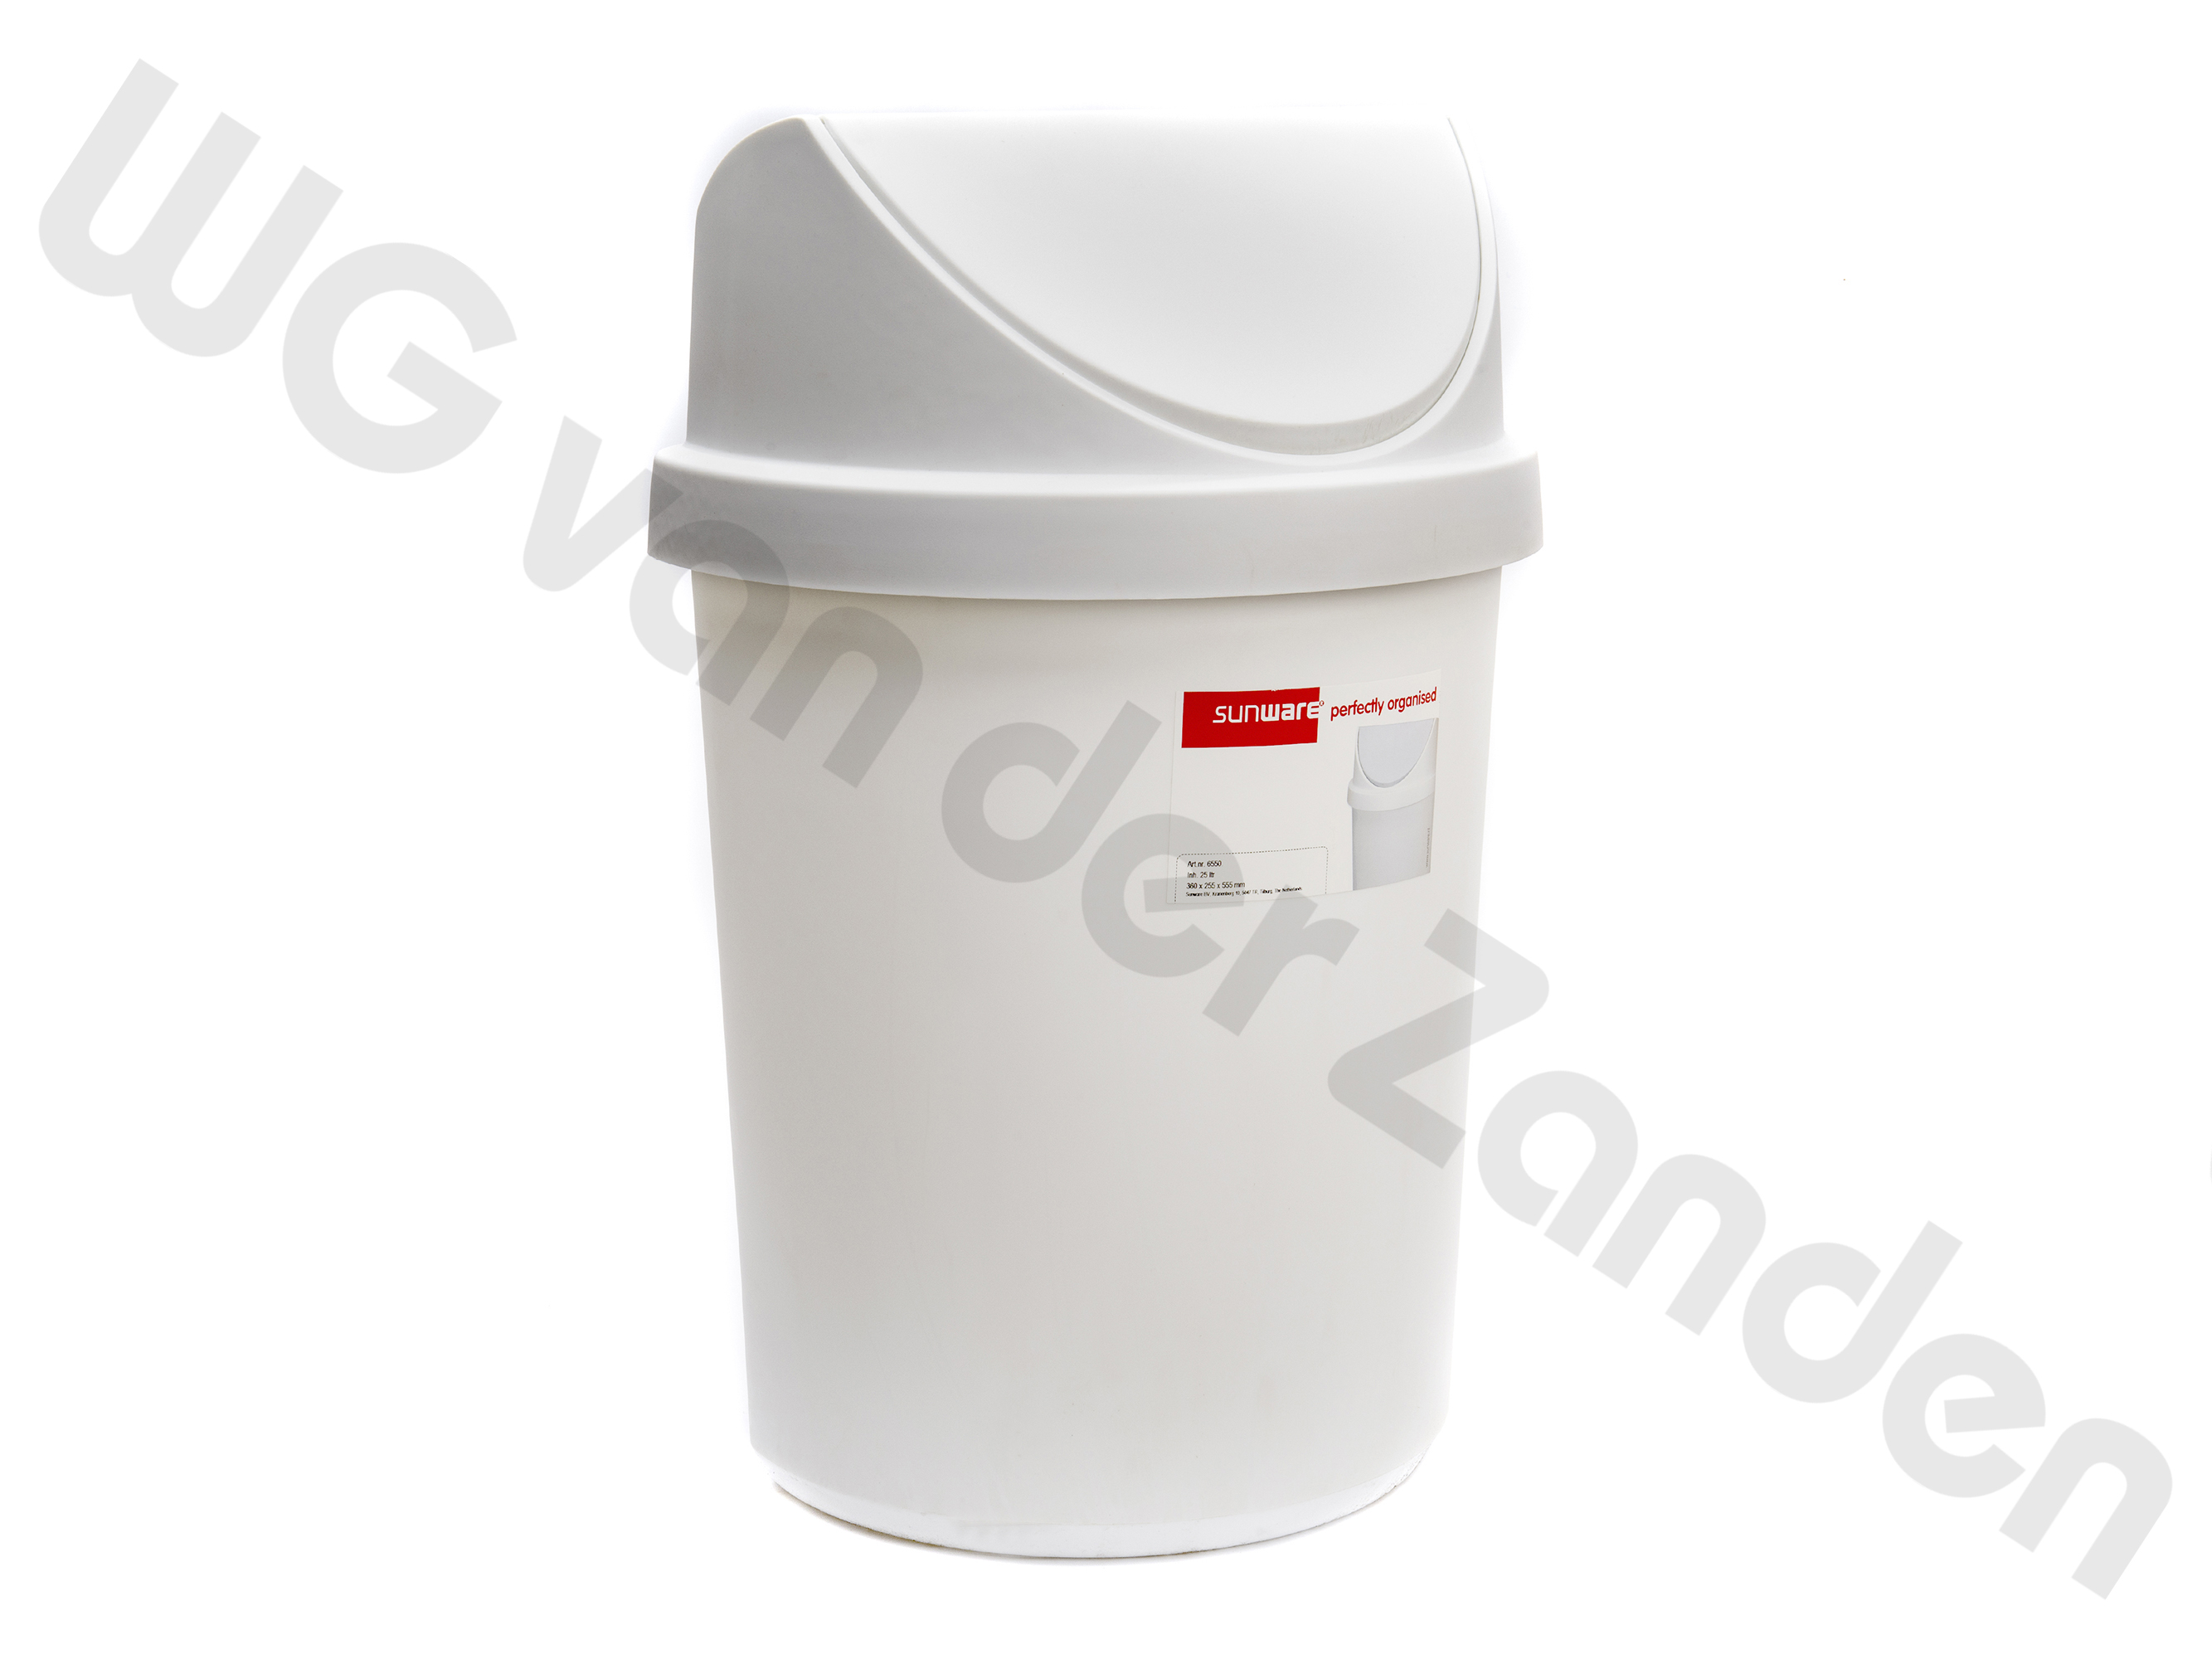 442012 GARBAGE BIN 25 LTR PLASTIC WITH SWING COVER